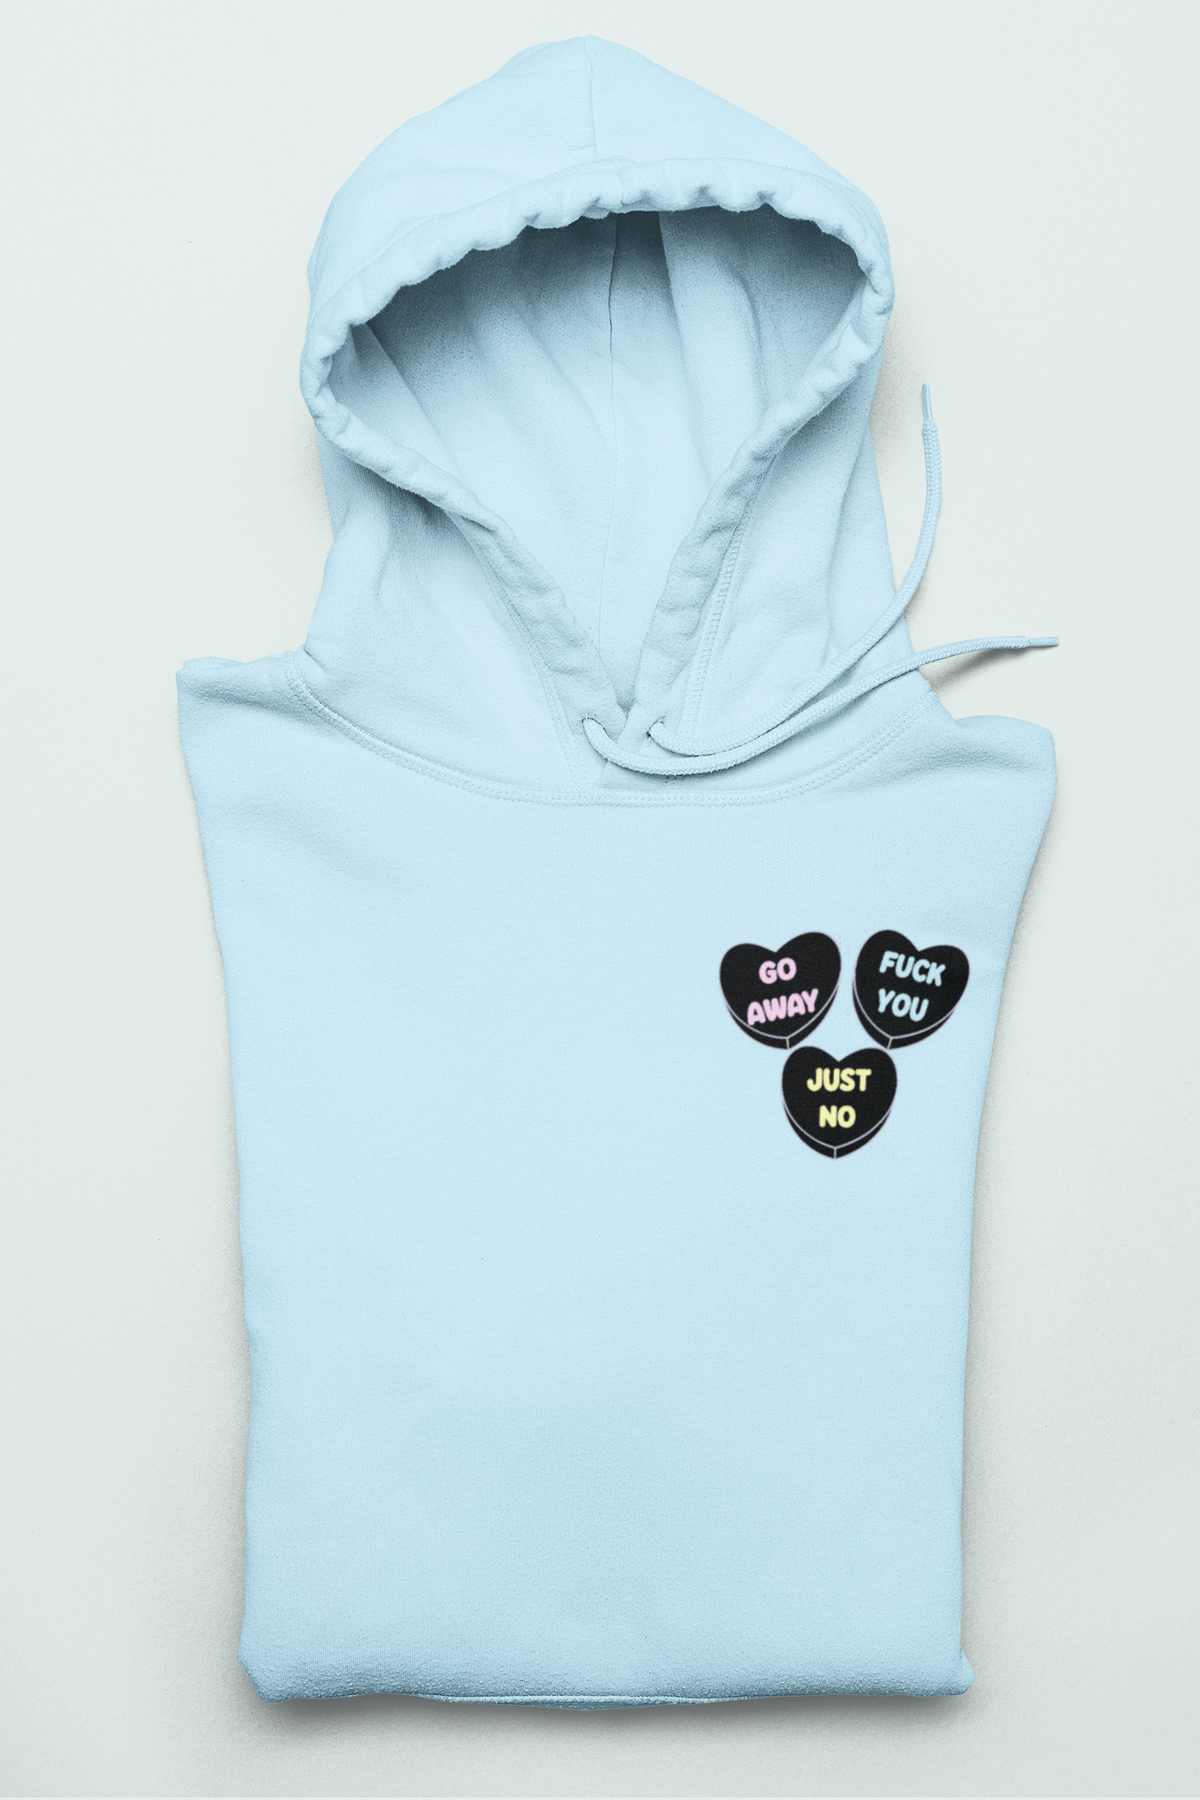 Light blue hoodie with candy hearts saying go away fuck you just no - HighCiti